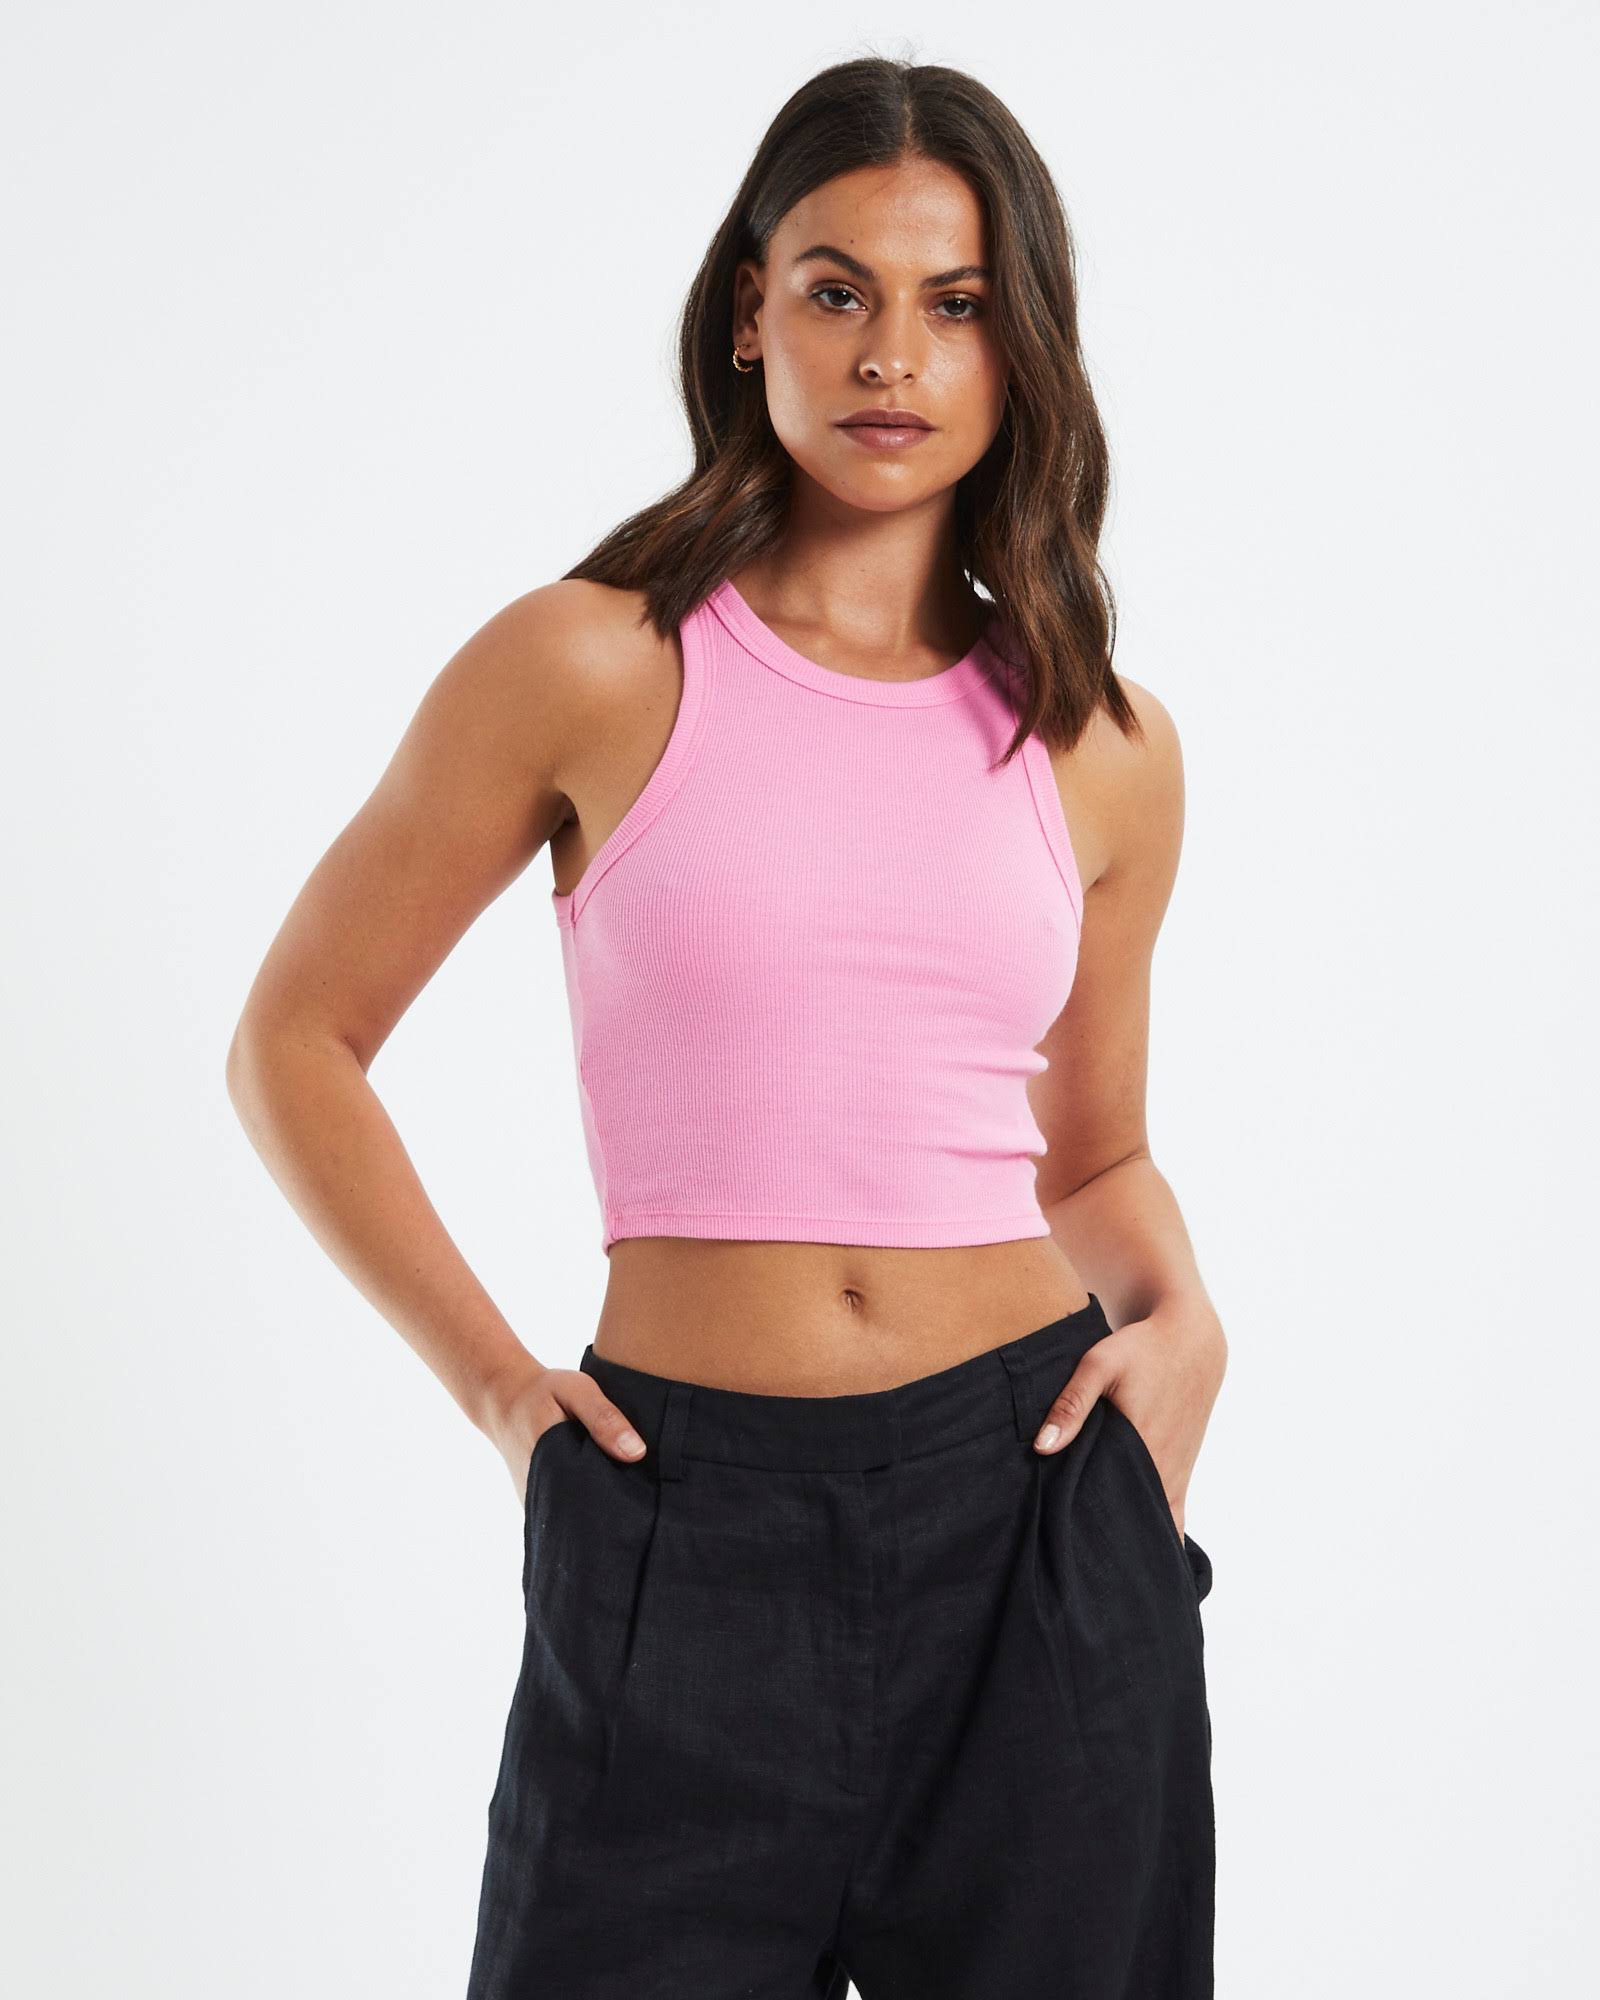 General Pants | Shopping outfit, Fashion tops, Tops